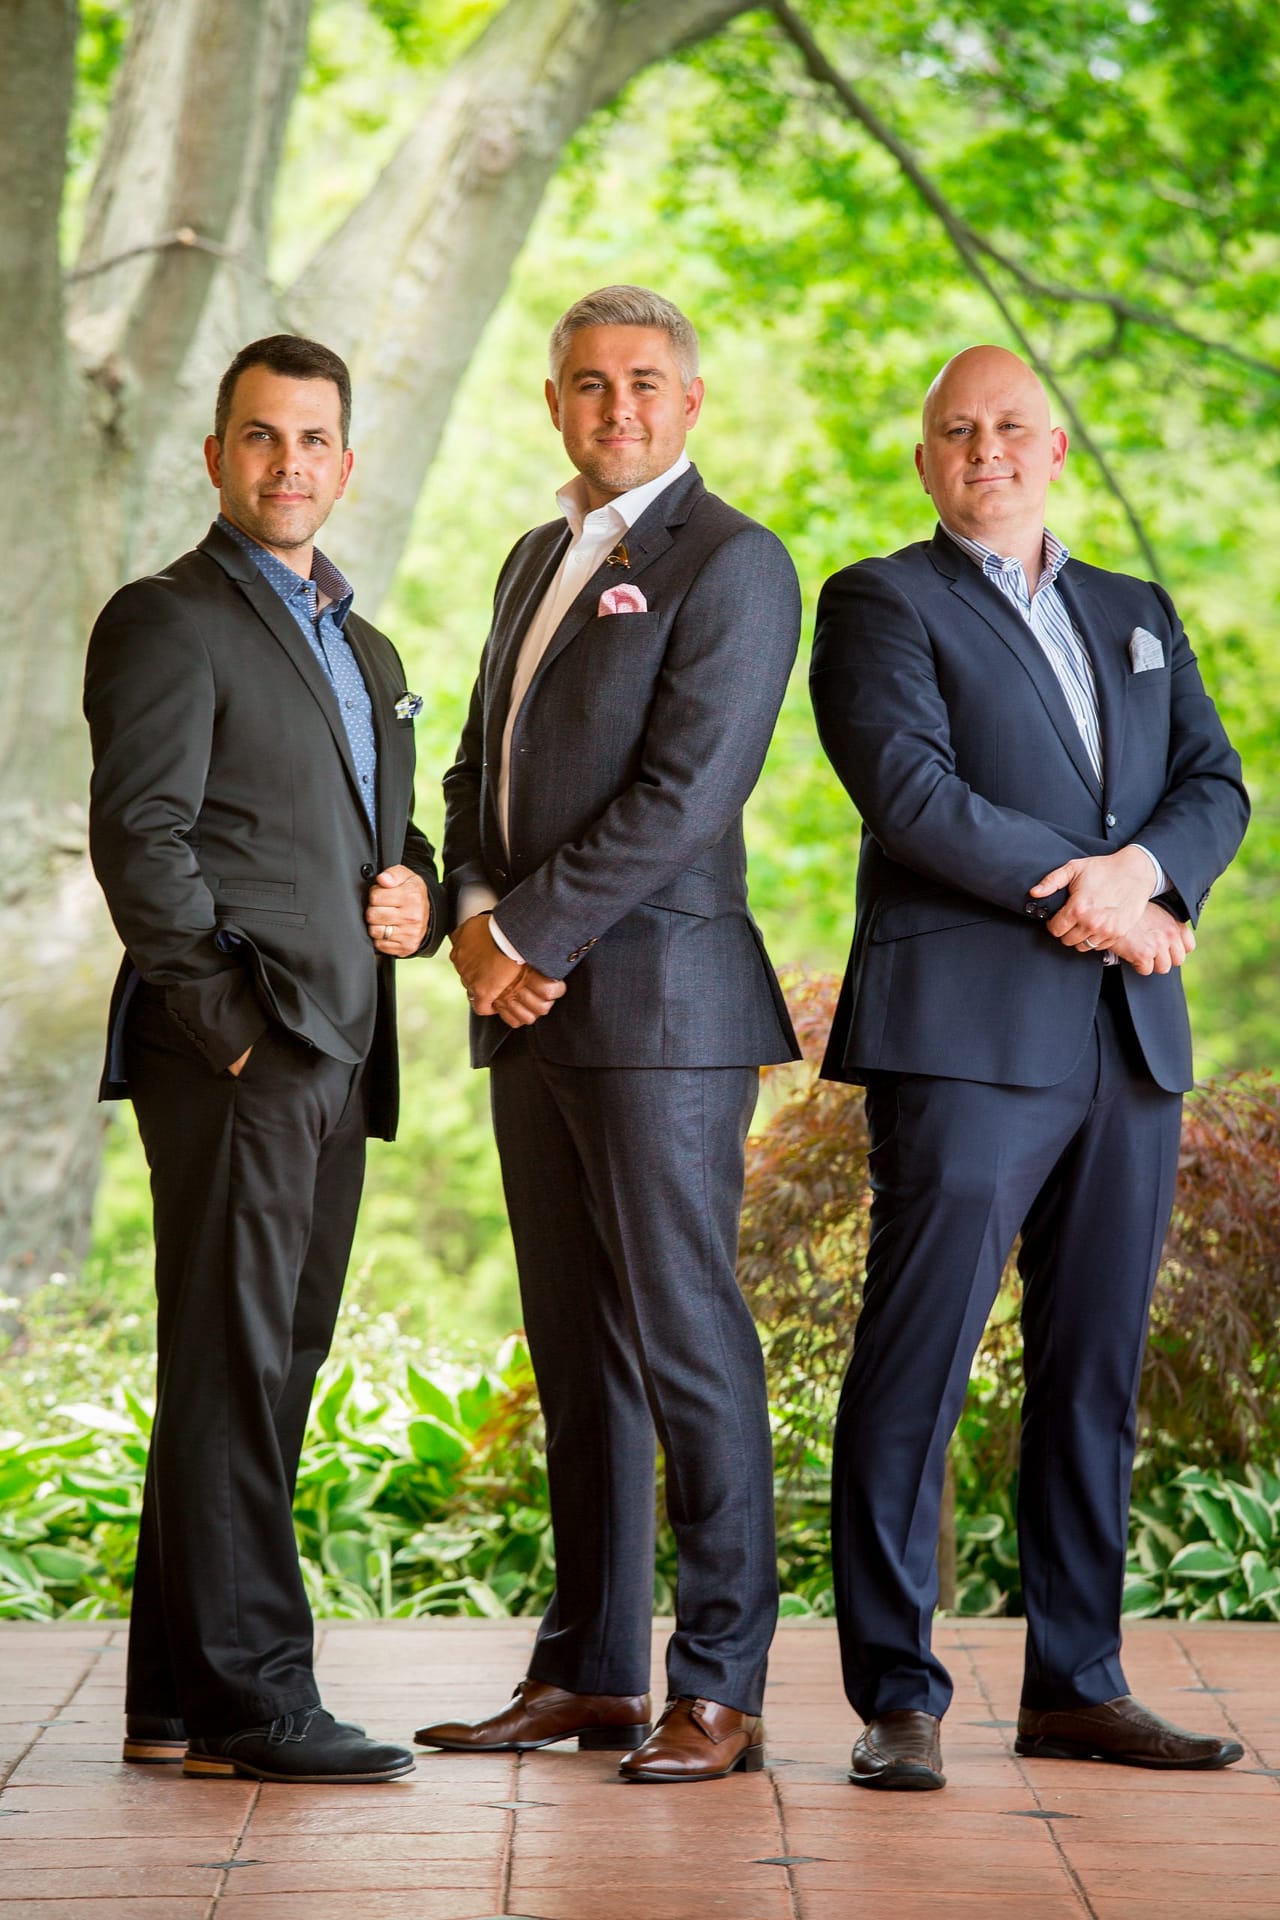 Group Photo of three real estate agents in front of trees and natural environment